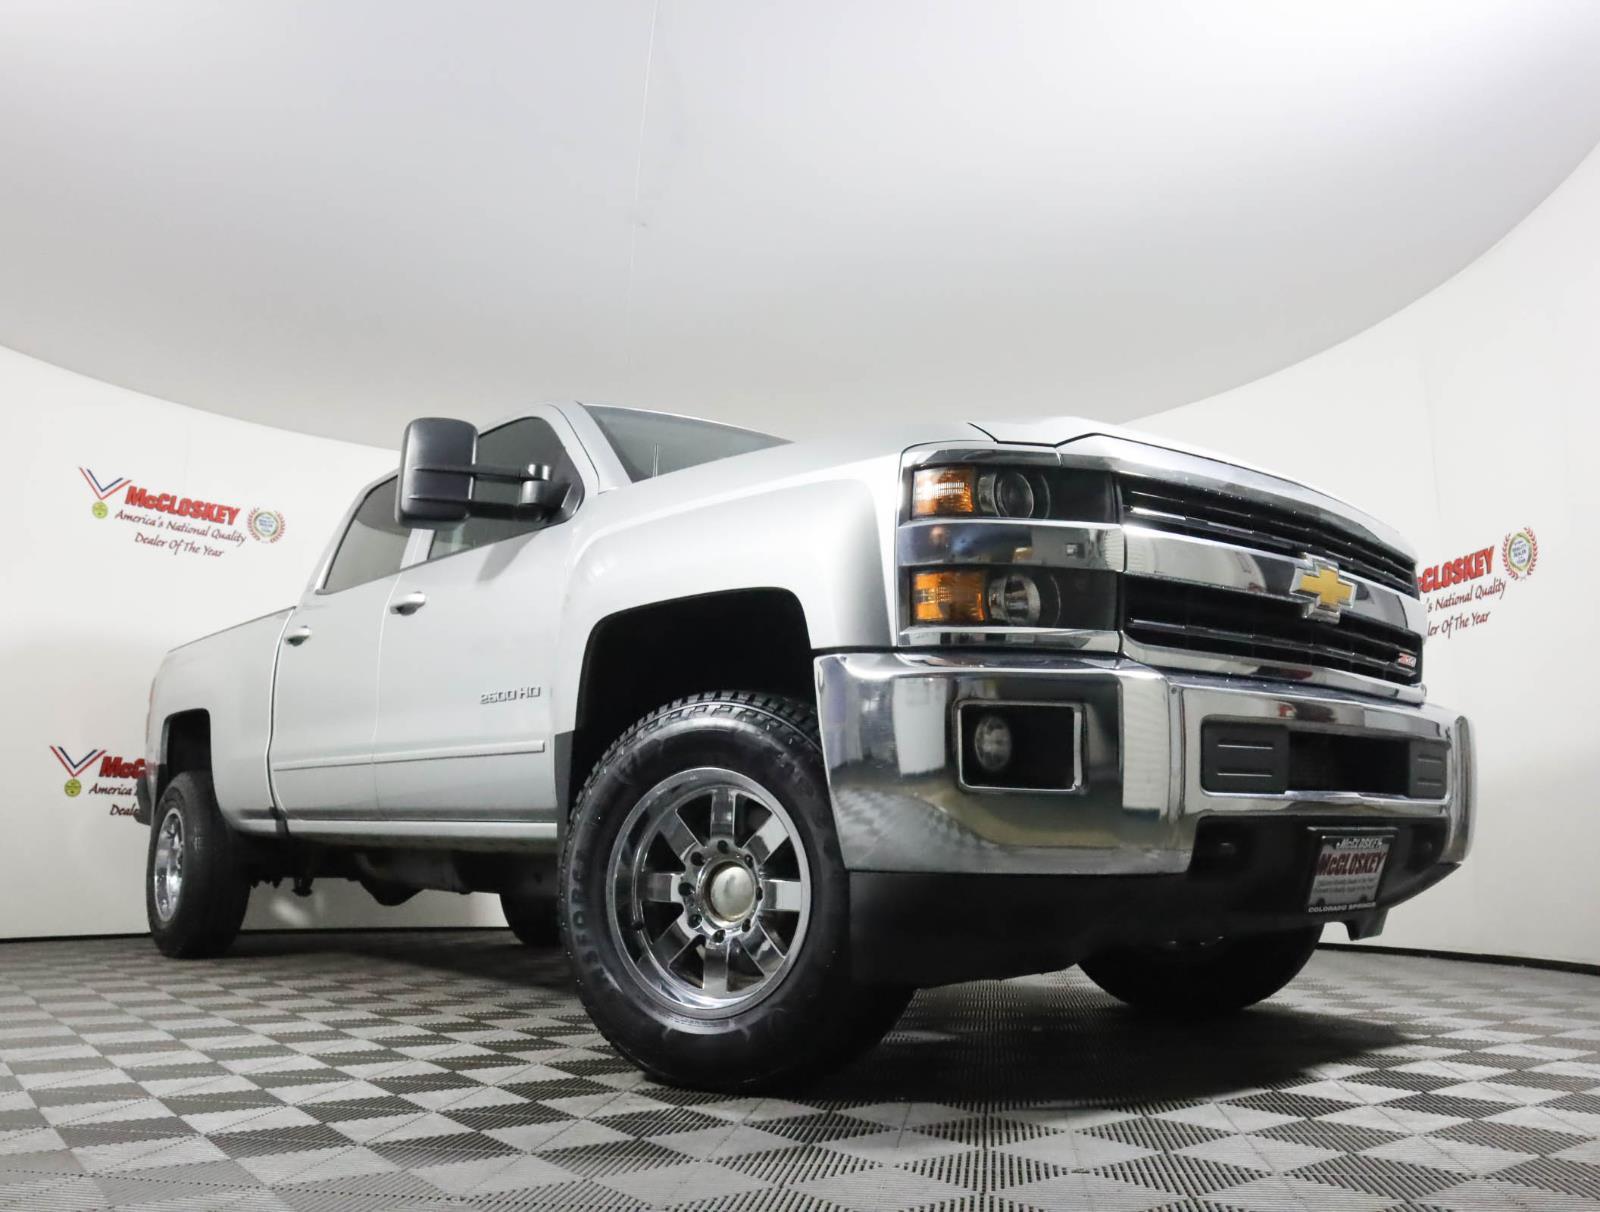 Preowned 2017 Chevrolet Silverado LT Z71 for sale by McCloskey Imports & 4X4's in Colorado Springs, CO